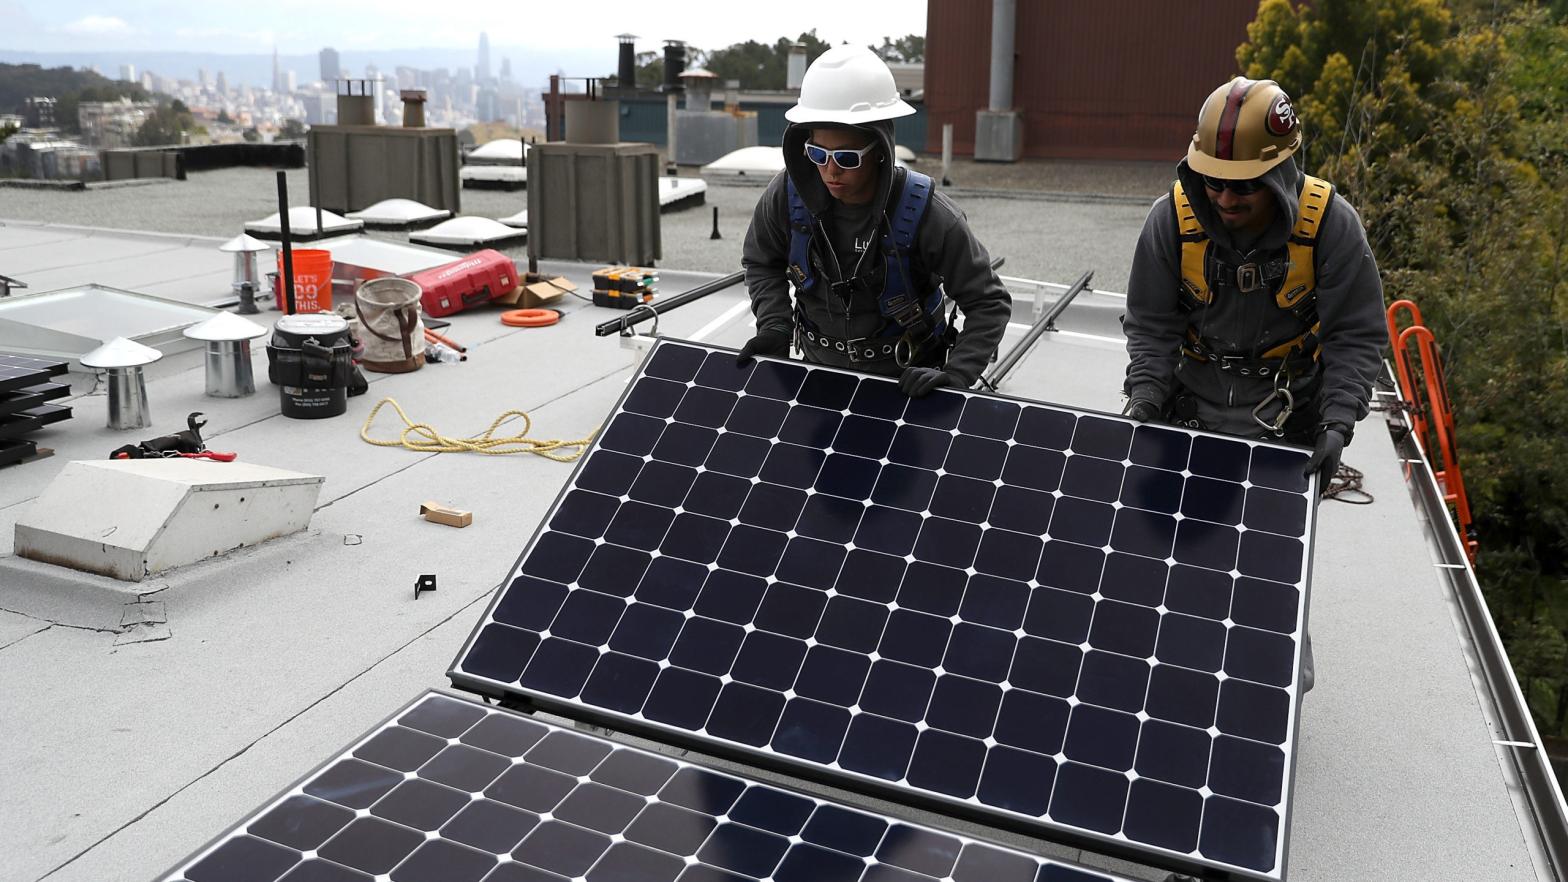 Workers install solar panels on the roof of a home on May 9, 2018 in San Francisco, California. (Photo: Justin Sullivan, Getty Images)